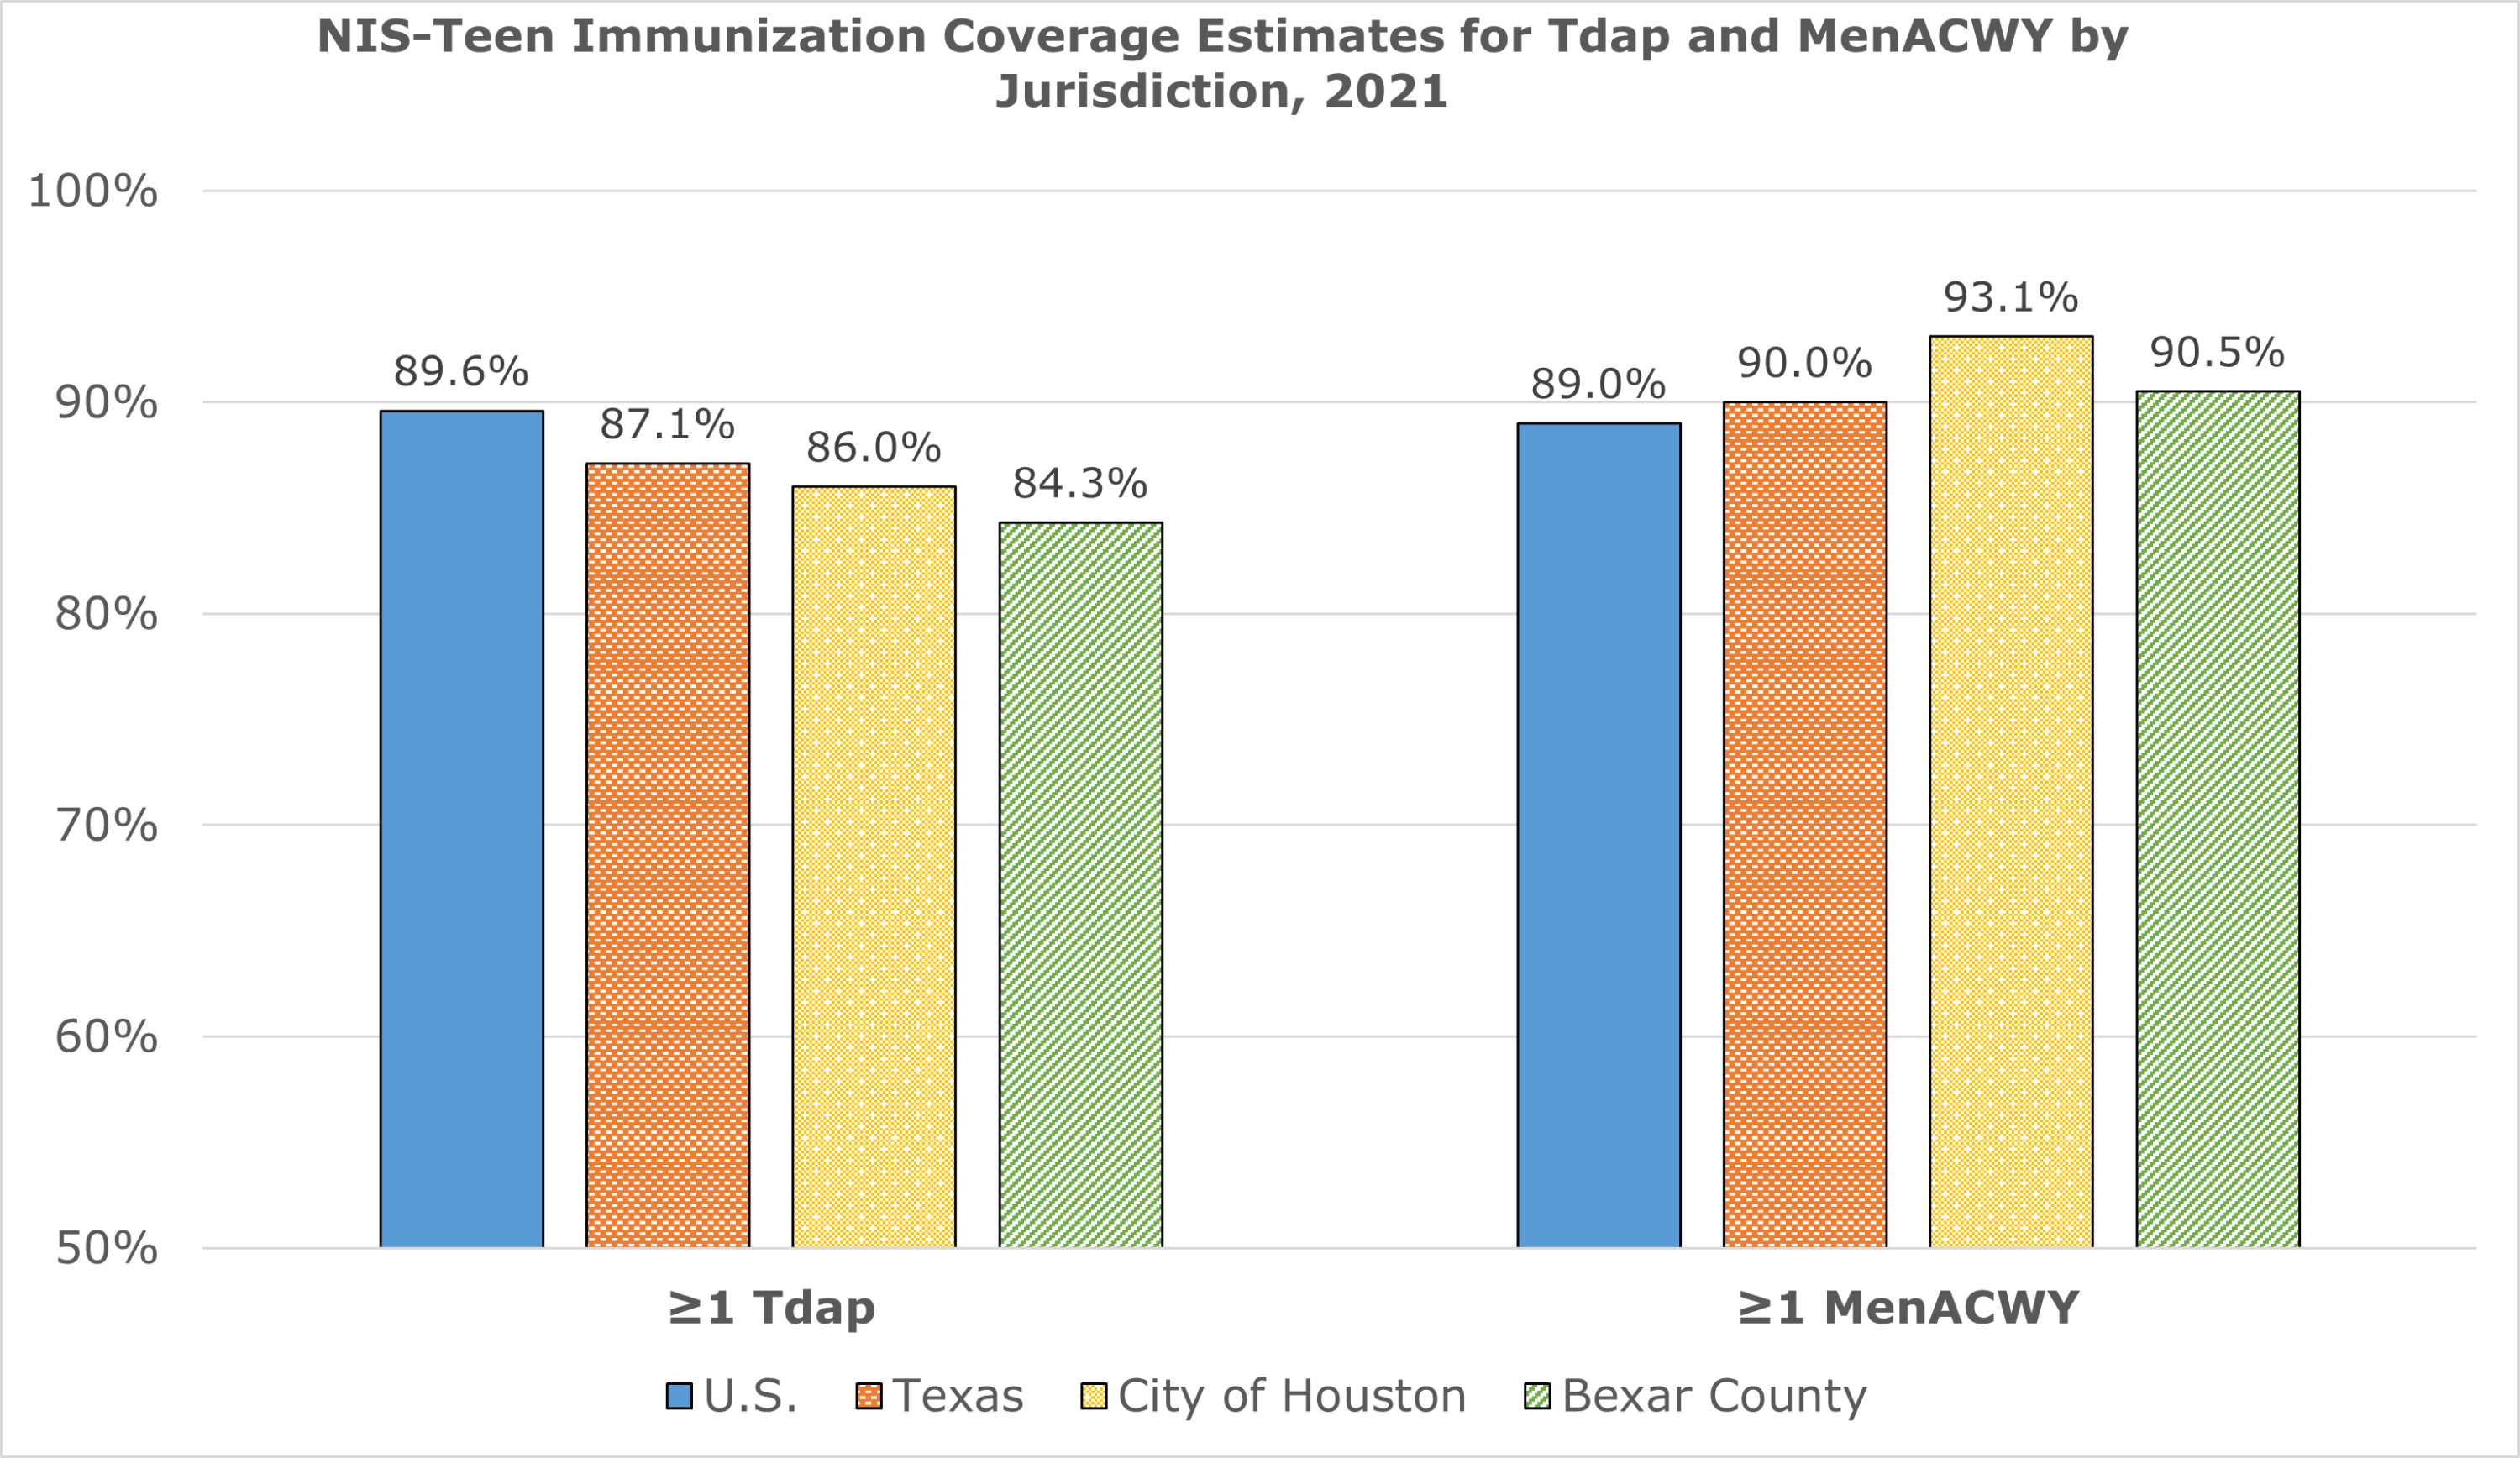 NIS-Teen Immunization Coverage Estimates for Tdap and MenACWY by Jurisdiction, 2021